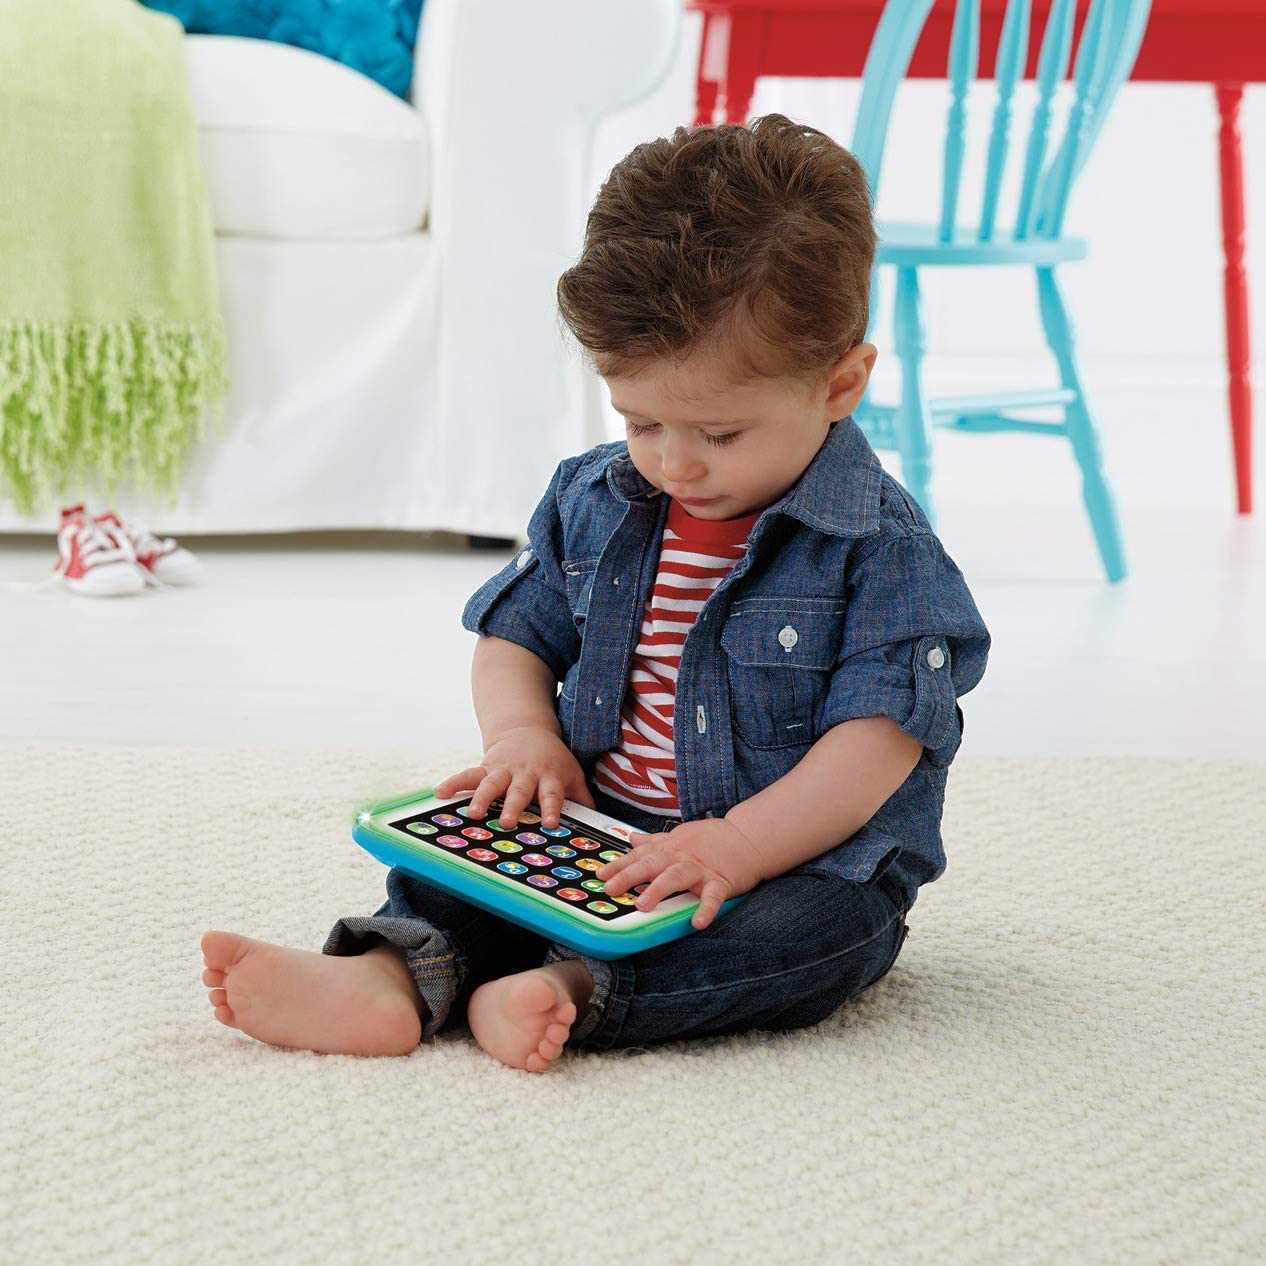 Fisher-Price Laugh & Learn Smart Stages Tablet, Blue, Musical Toy with Lights, Sounds and Learning Content for Infants and Toddlers